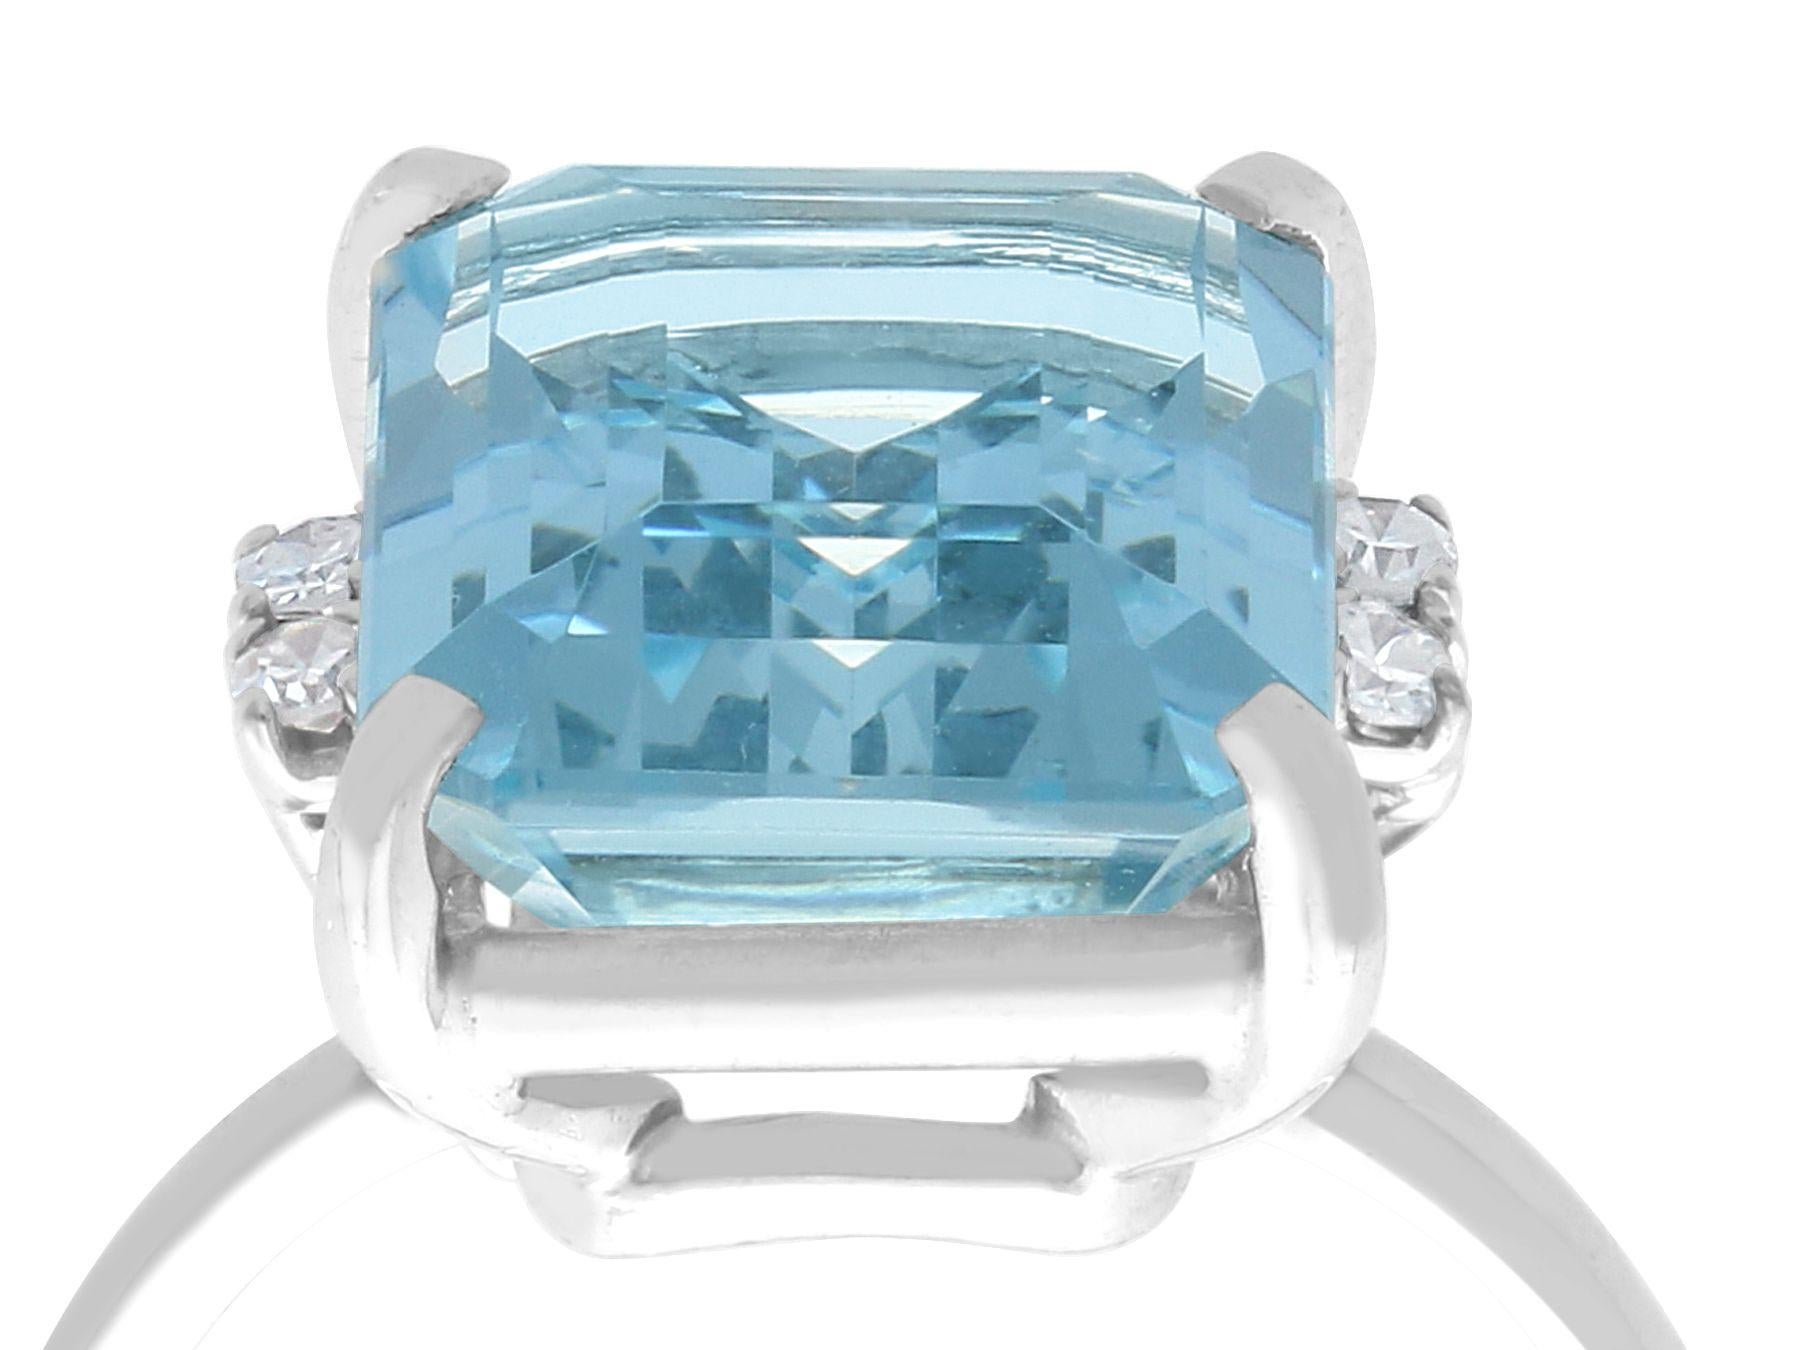 A stunning vintage 5.72 carat aquamarine and 0.08 carat diamond, 15 karat white gold cocktail ring; part of our diverse gemstone jewelry and estate jewelry collections.

This stunning, fine and impressive vintage emerald cut aquamarine ring has been